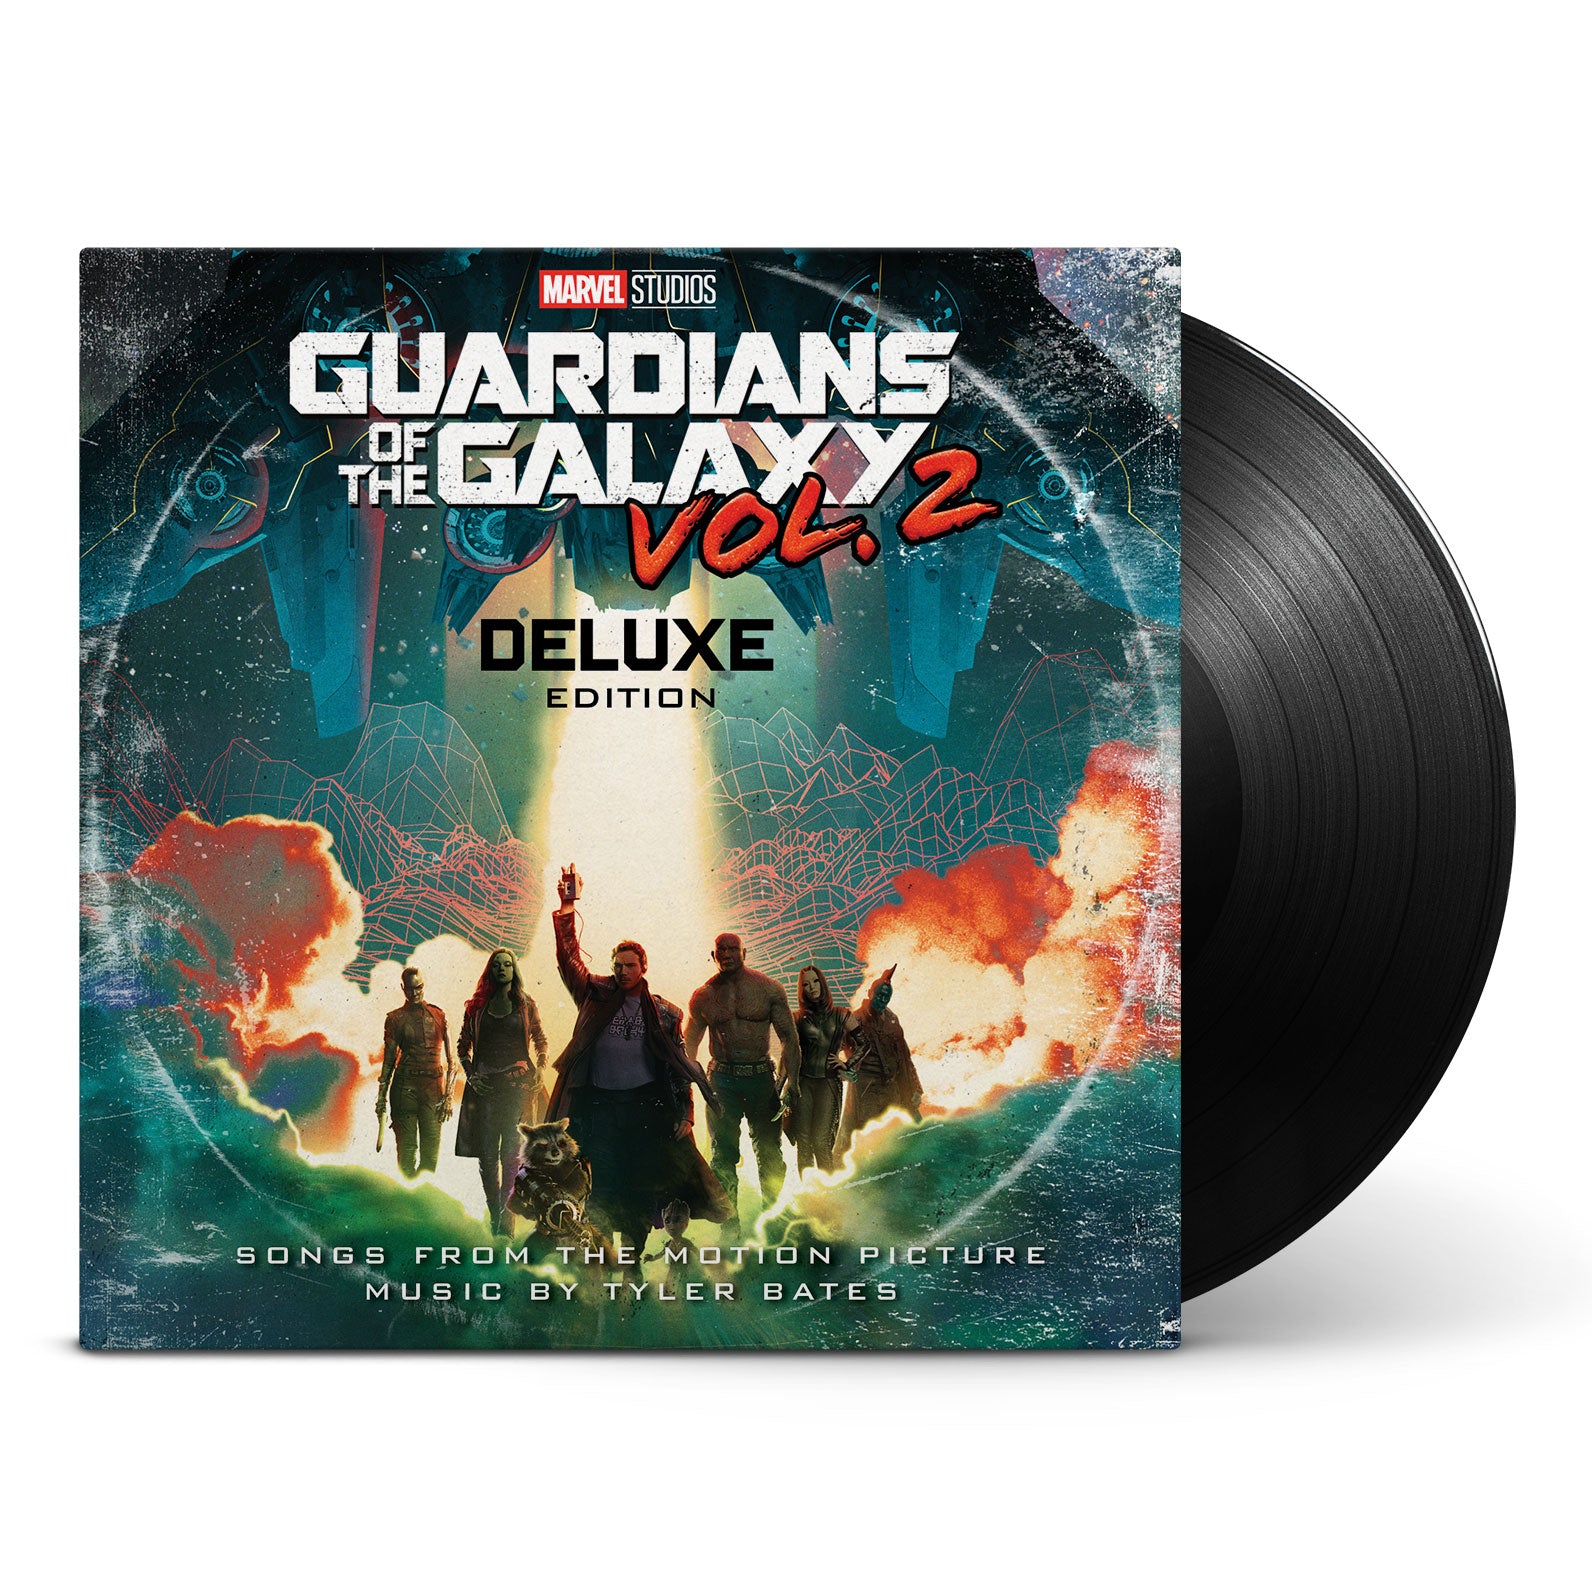 Various Artists - Guardians Of The Galaxy: Songs From The Motion Picture & Score Vol 2: Deluxe Edition (2LP Gatefold Sleeve)